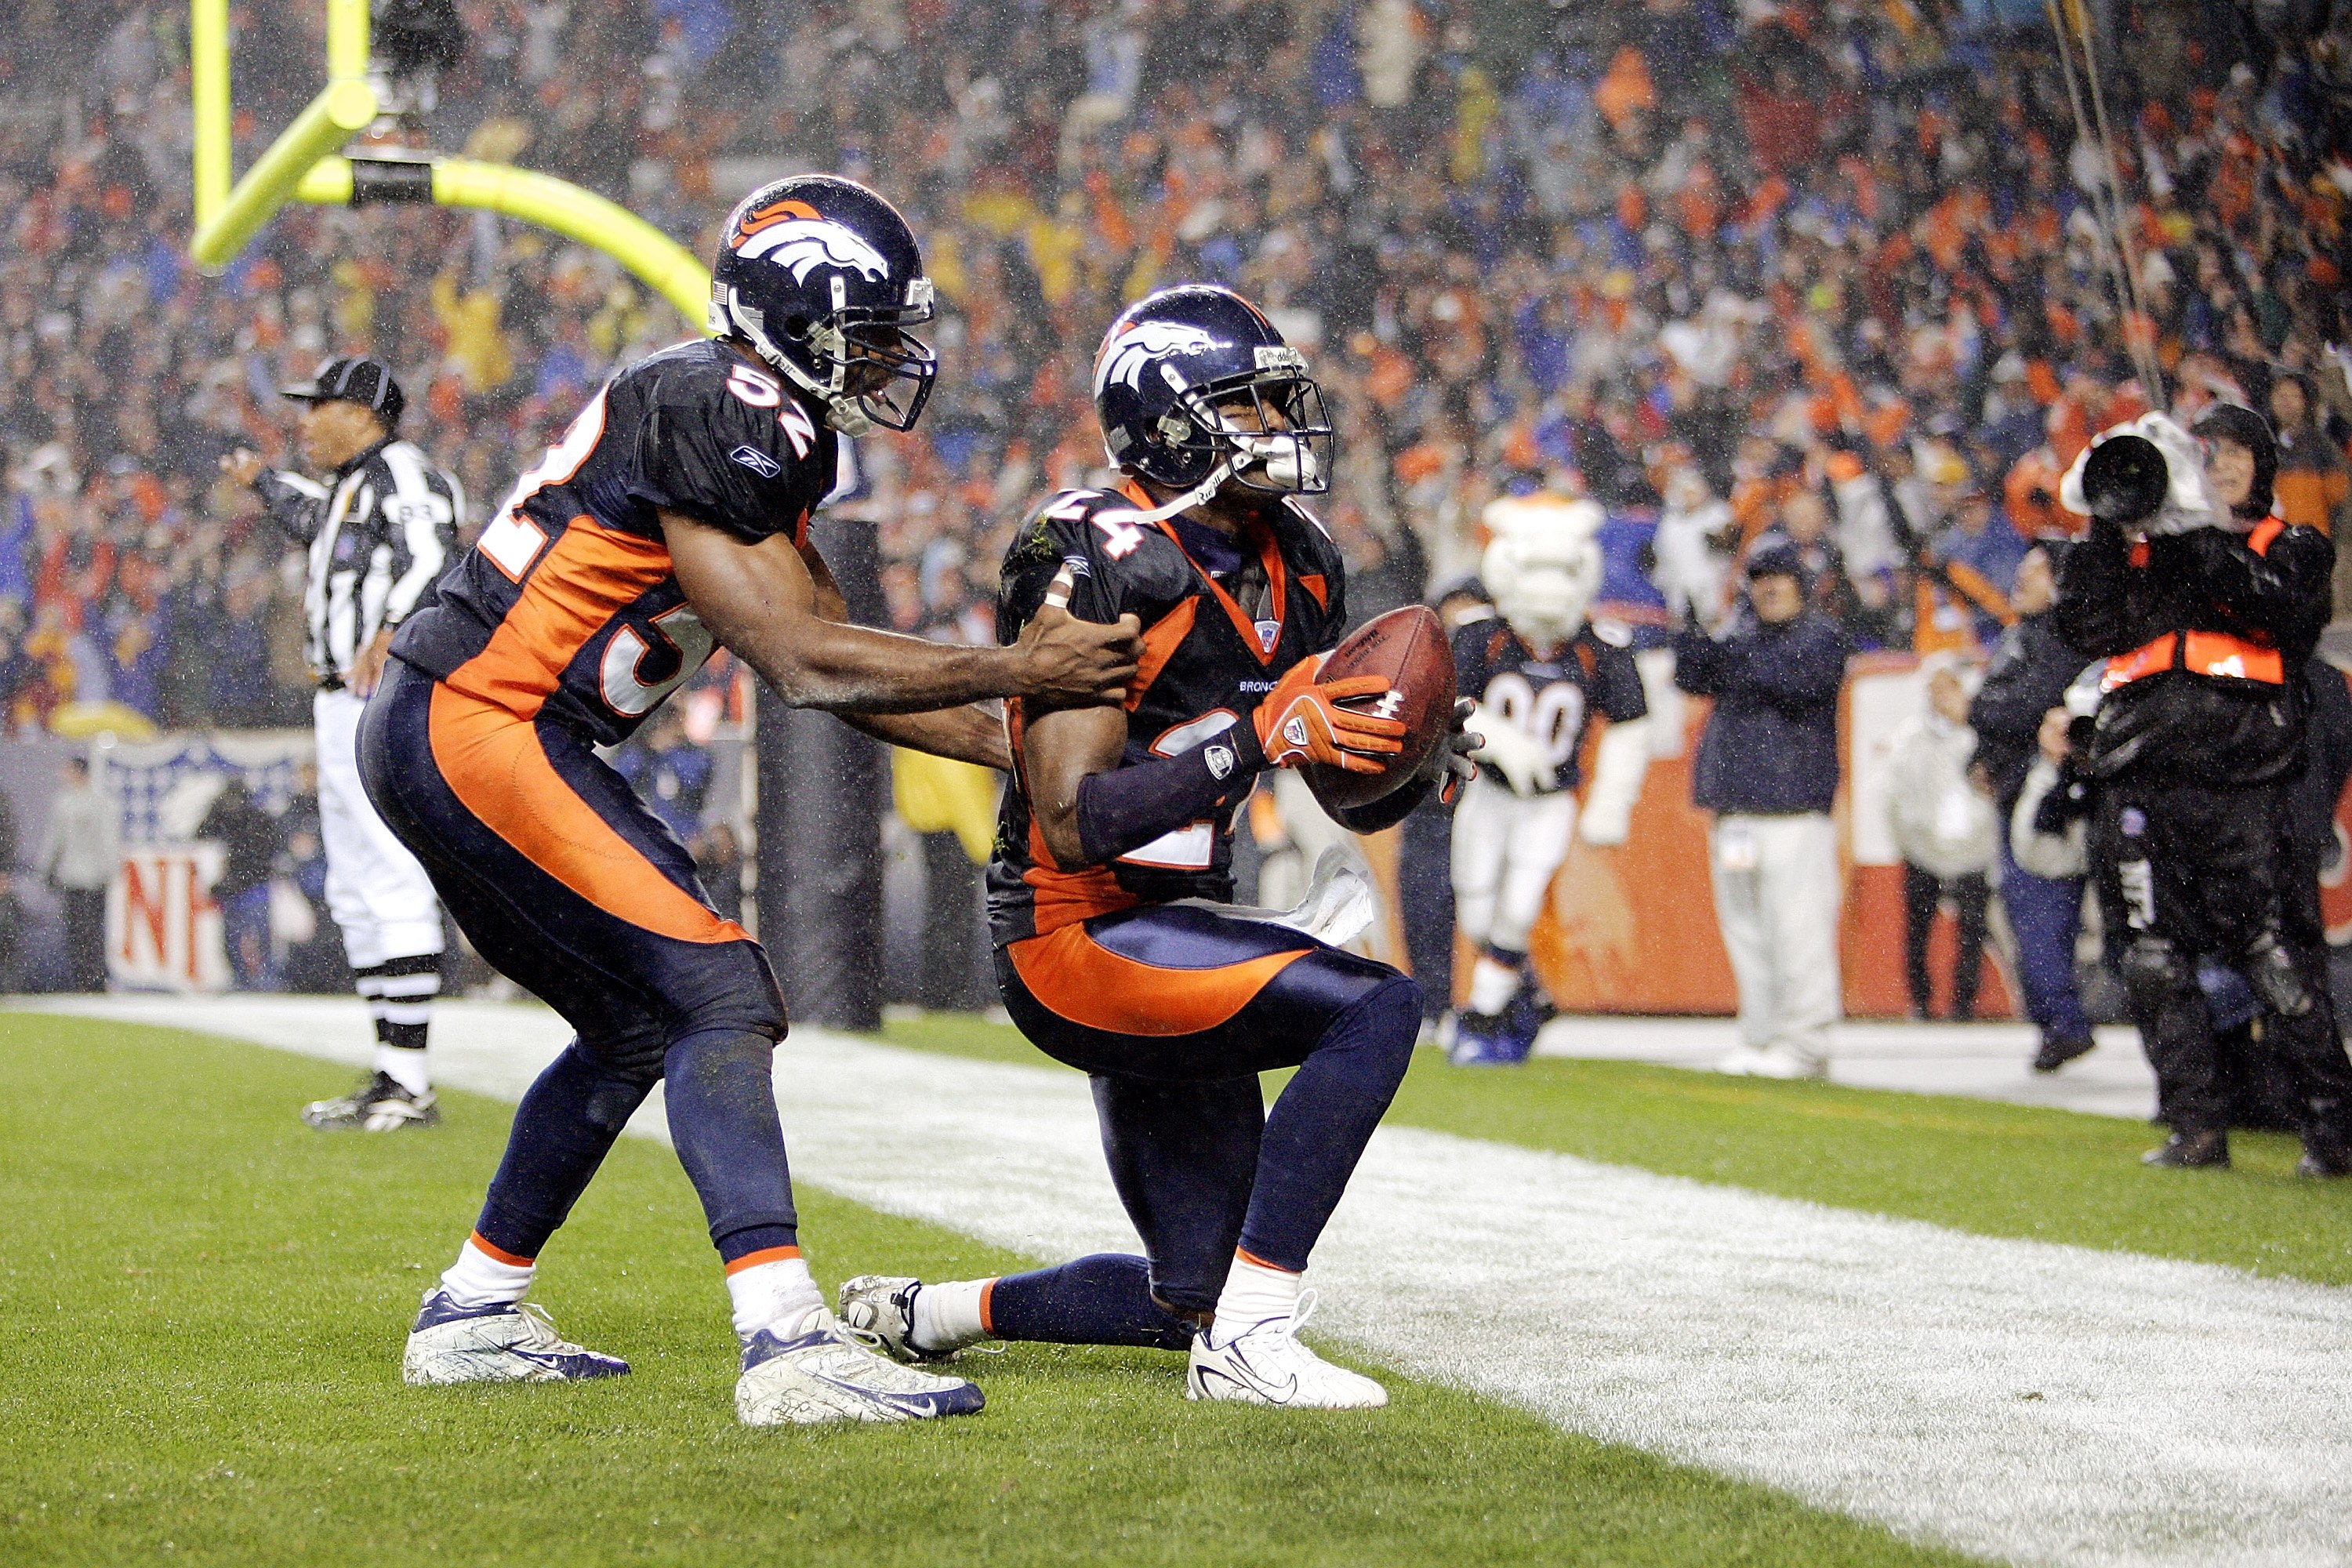 DENVER - OCTOBER 09:  Cornerback Champ Bailey #24 of the Denver Broncos is congratulated by teammate Ian Gold #52 after Bailey intercepted a pass intended for Clarence Moore of the Baltimore Ravens in the endzone for a touchback with 36 seconds remaining